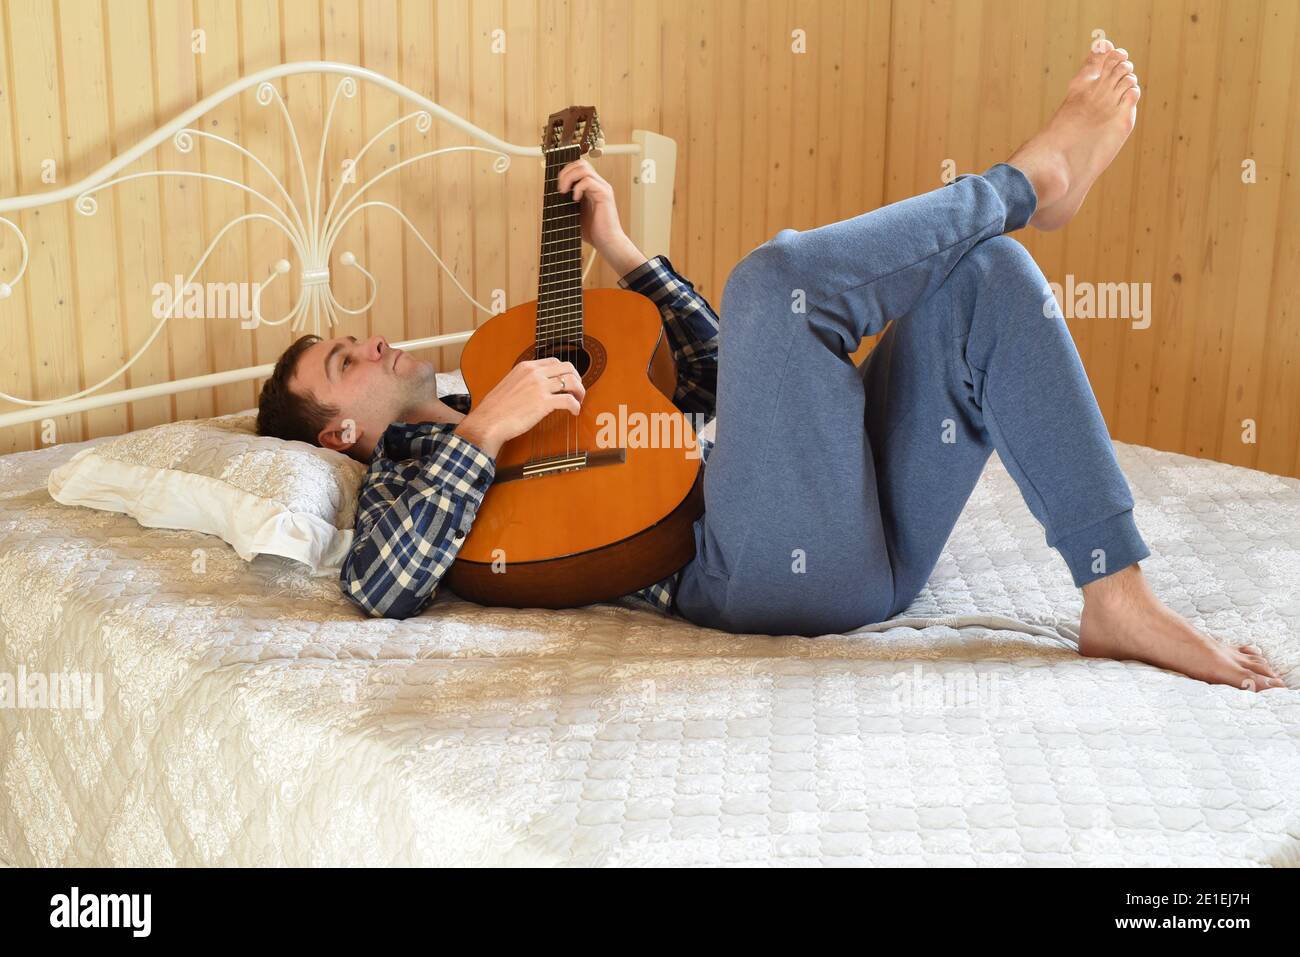 Young man playing guitar and laying on bed on weekend morning Stock Photo